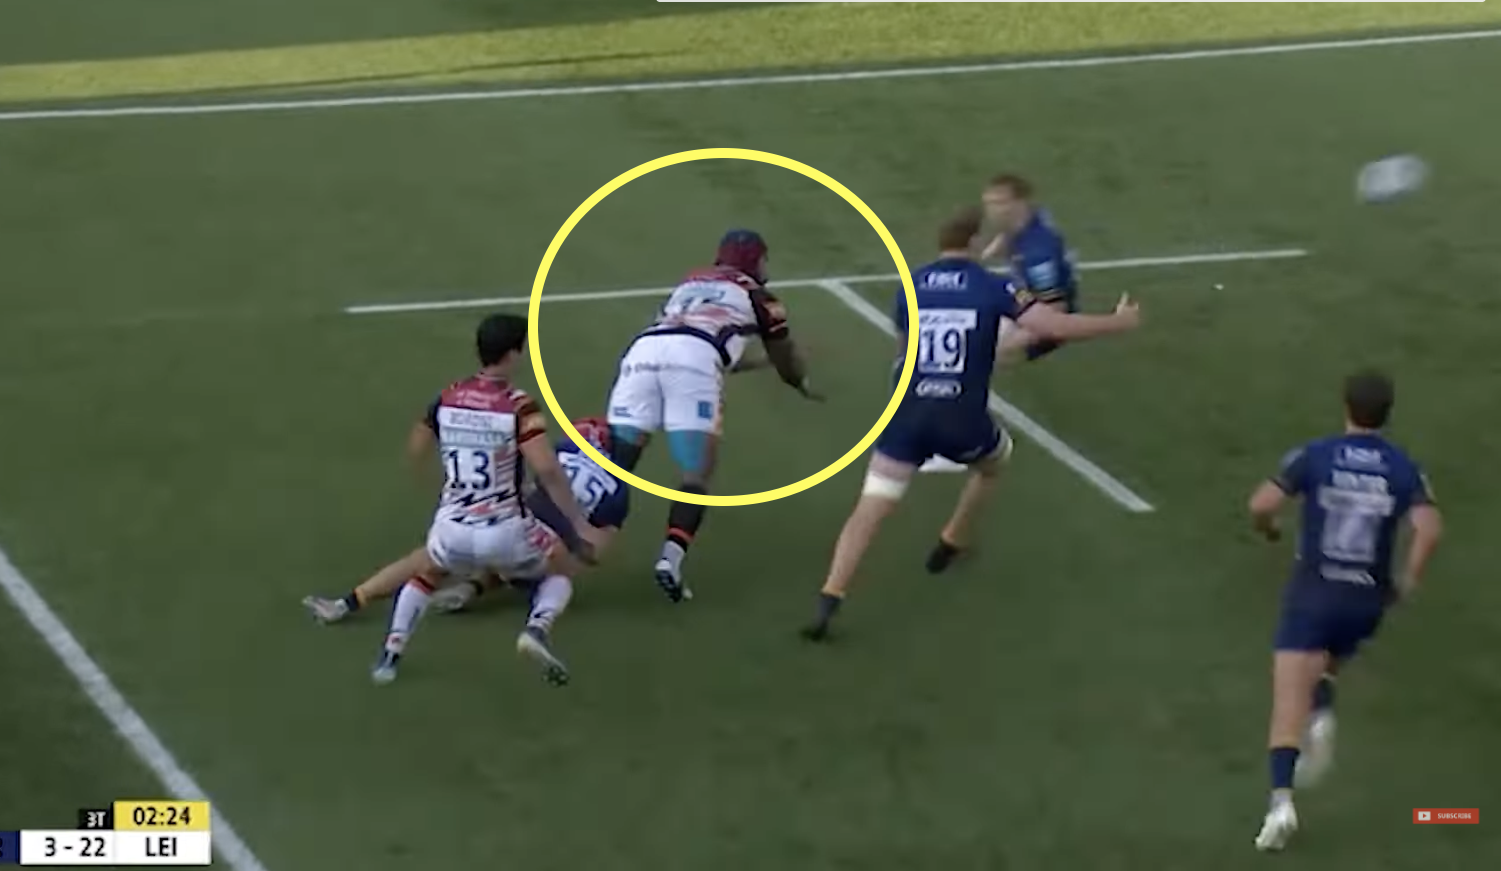 Did Leicester score the try of the season at the weekend?